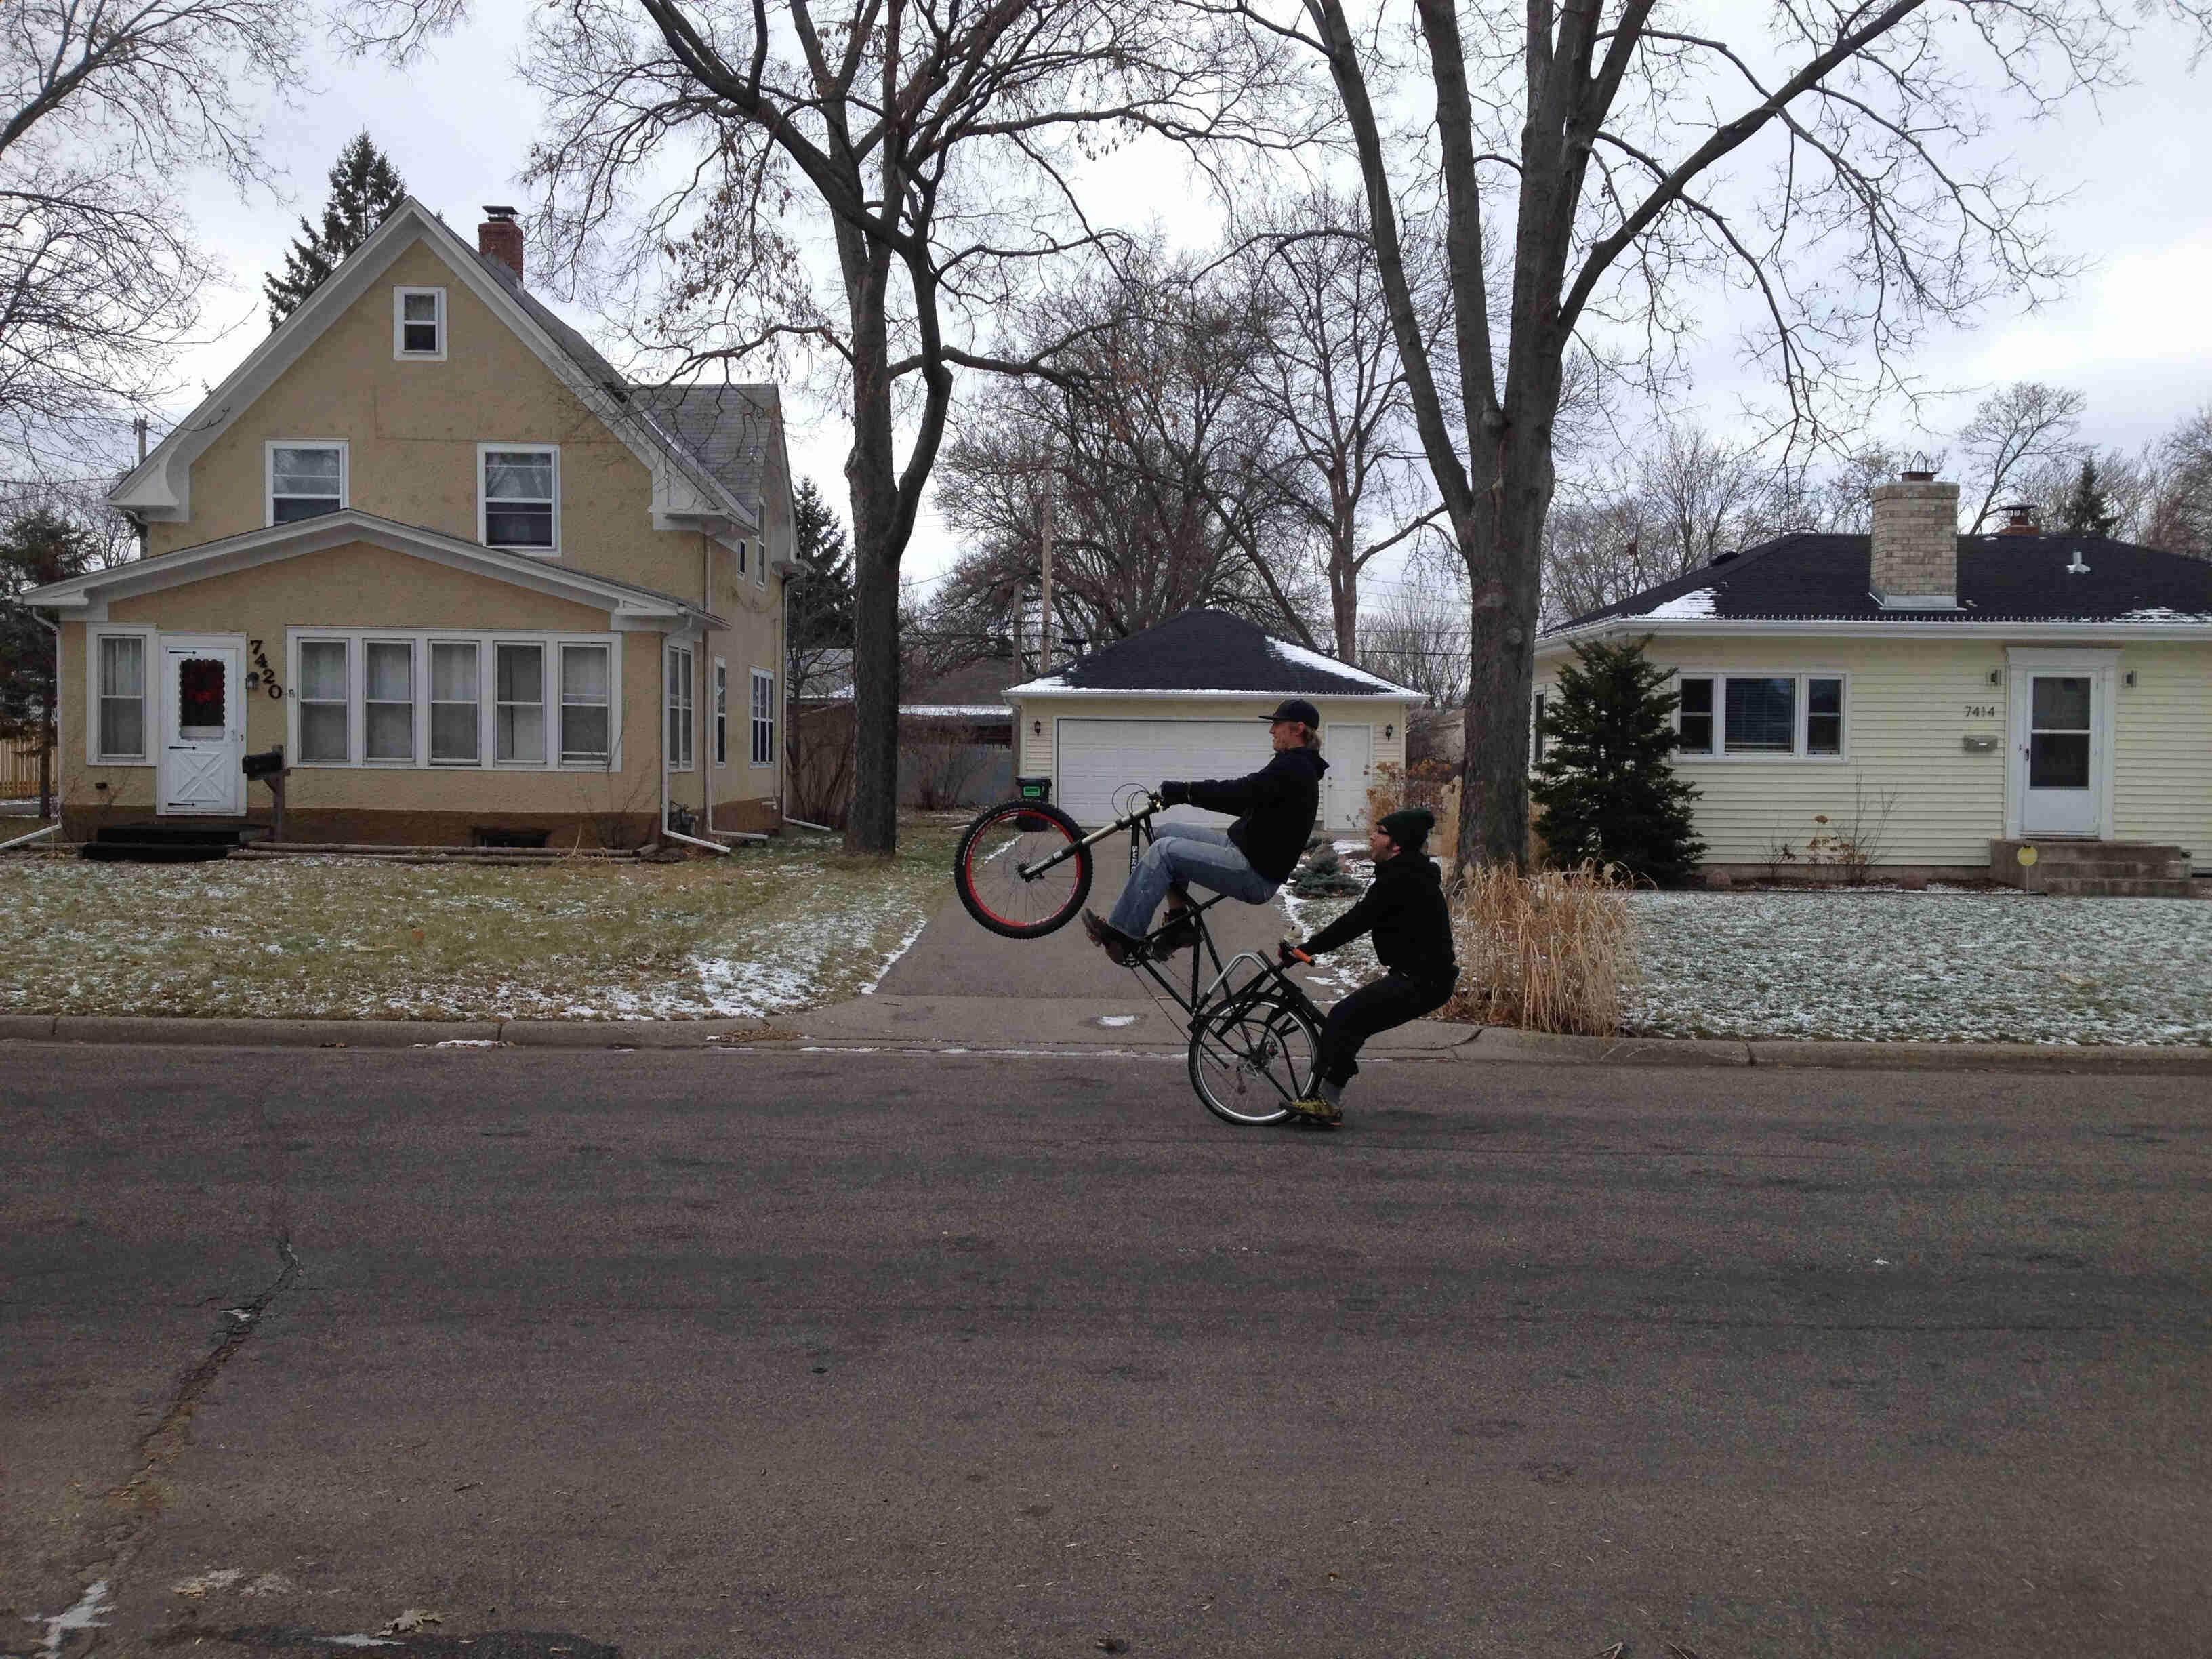 Left side view of a cyclist riding a wheelie on a black Surly Big Dummy bike with a person on back, on a paved street